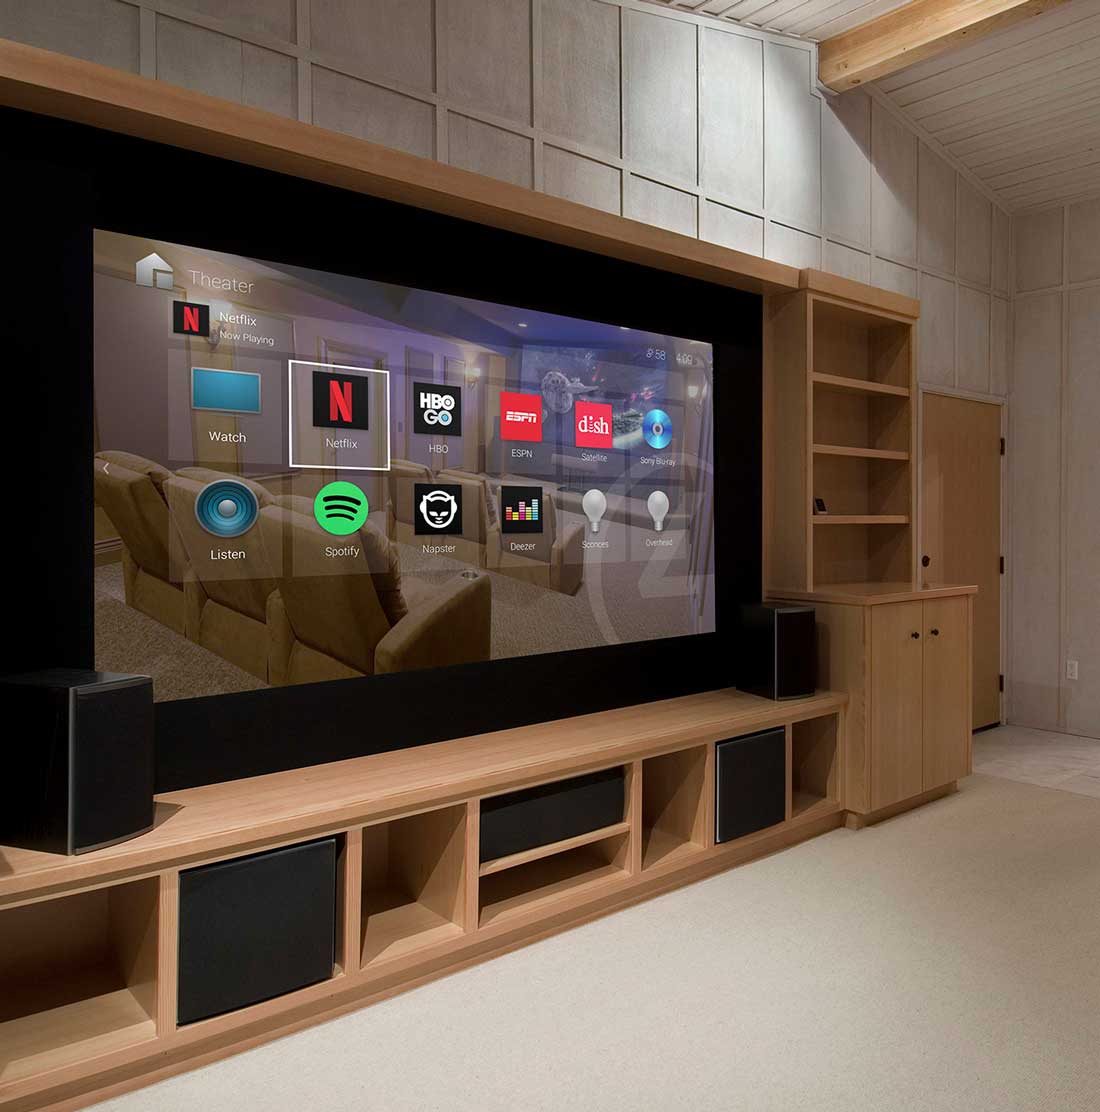 Home theater room with Control4 Smart Home Automation System